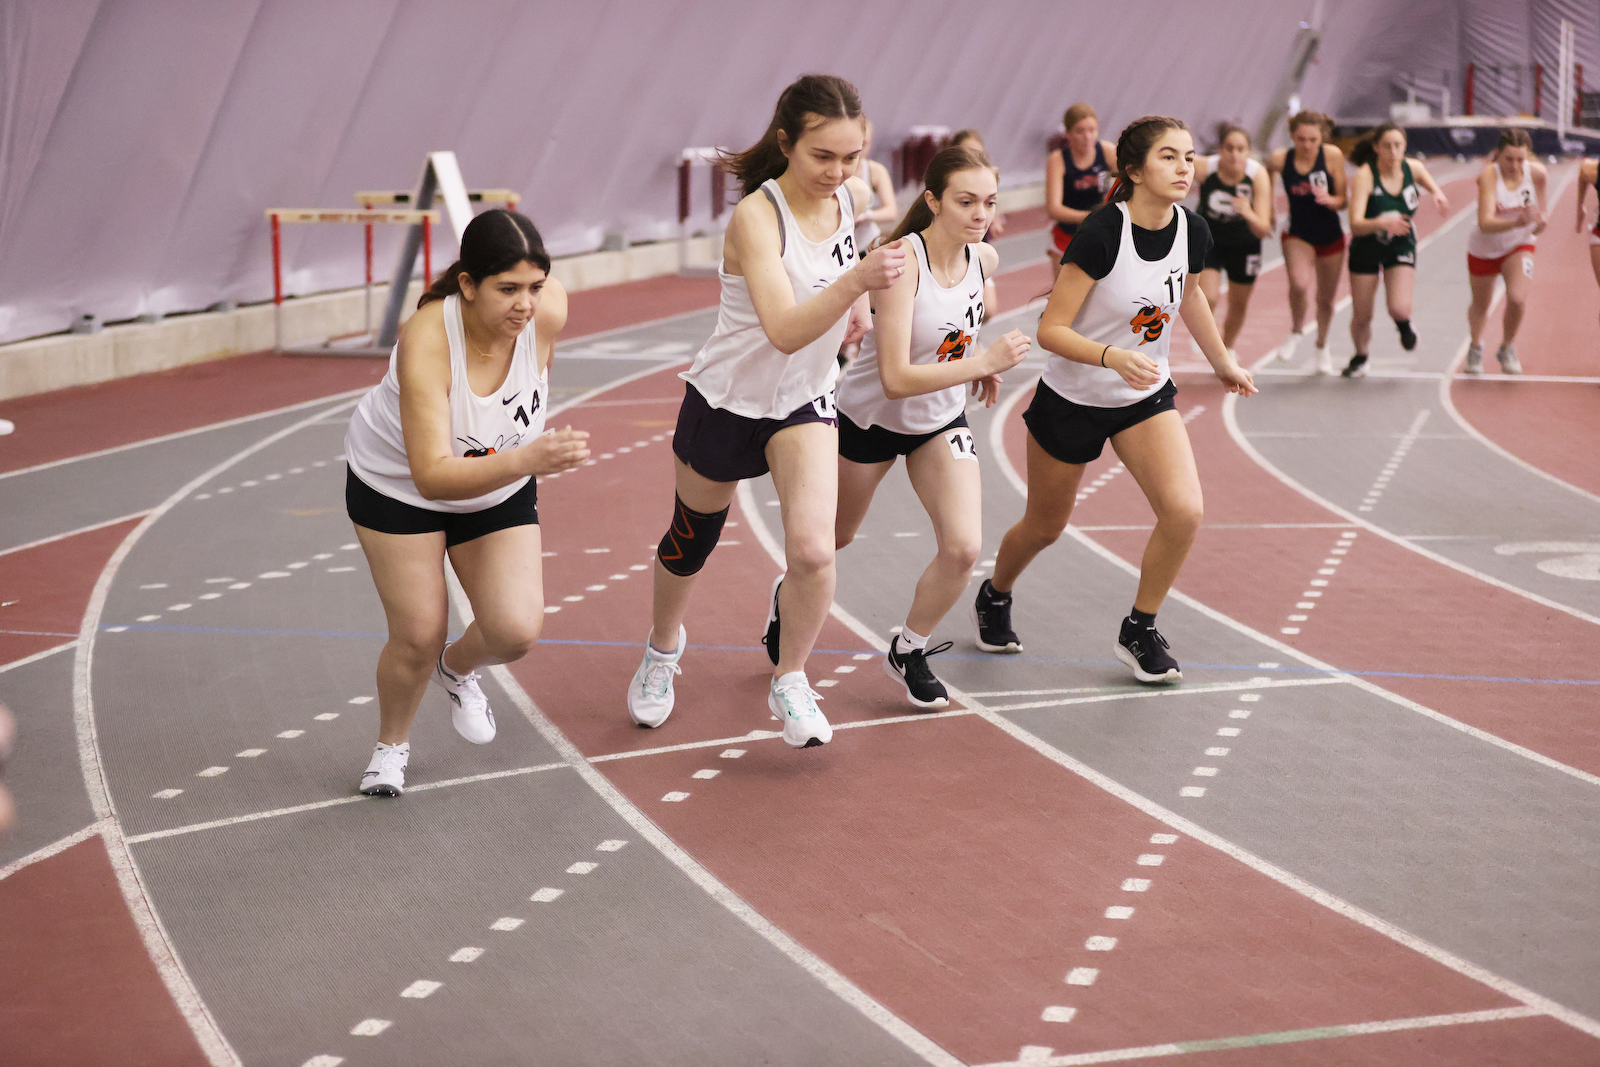 Girls' Indoor Track (Photos) gallery cover photo